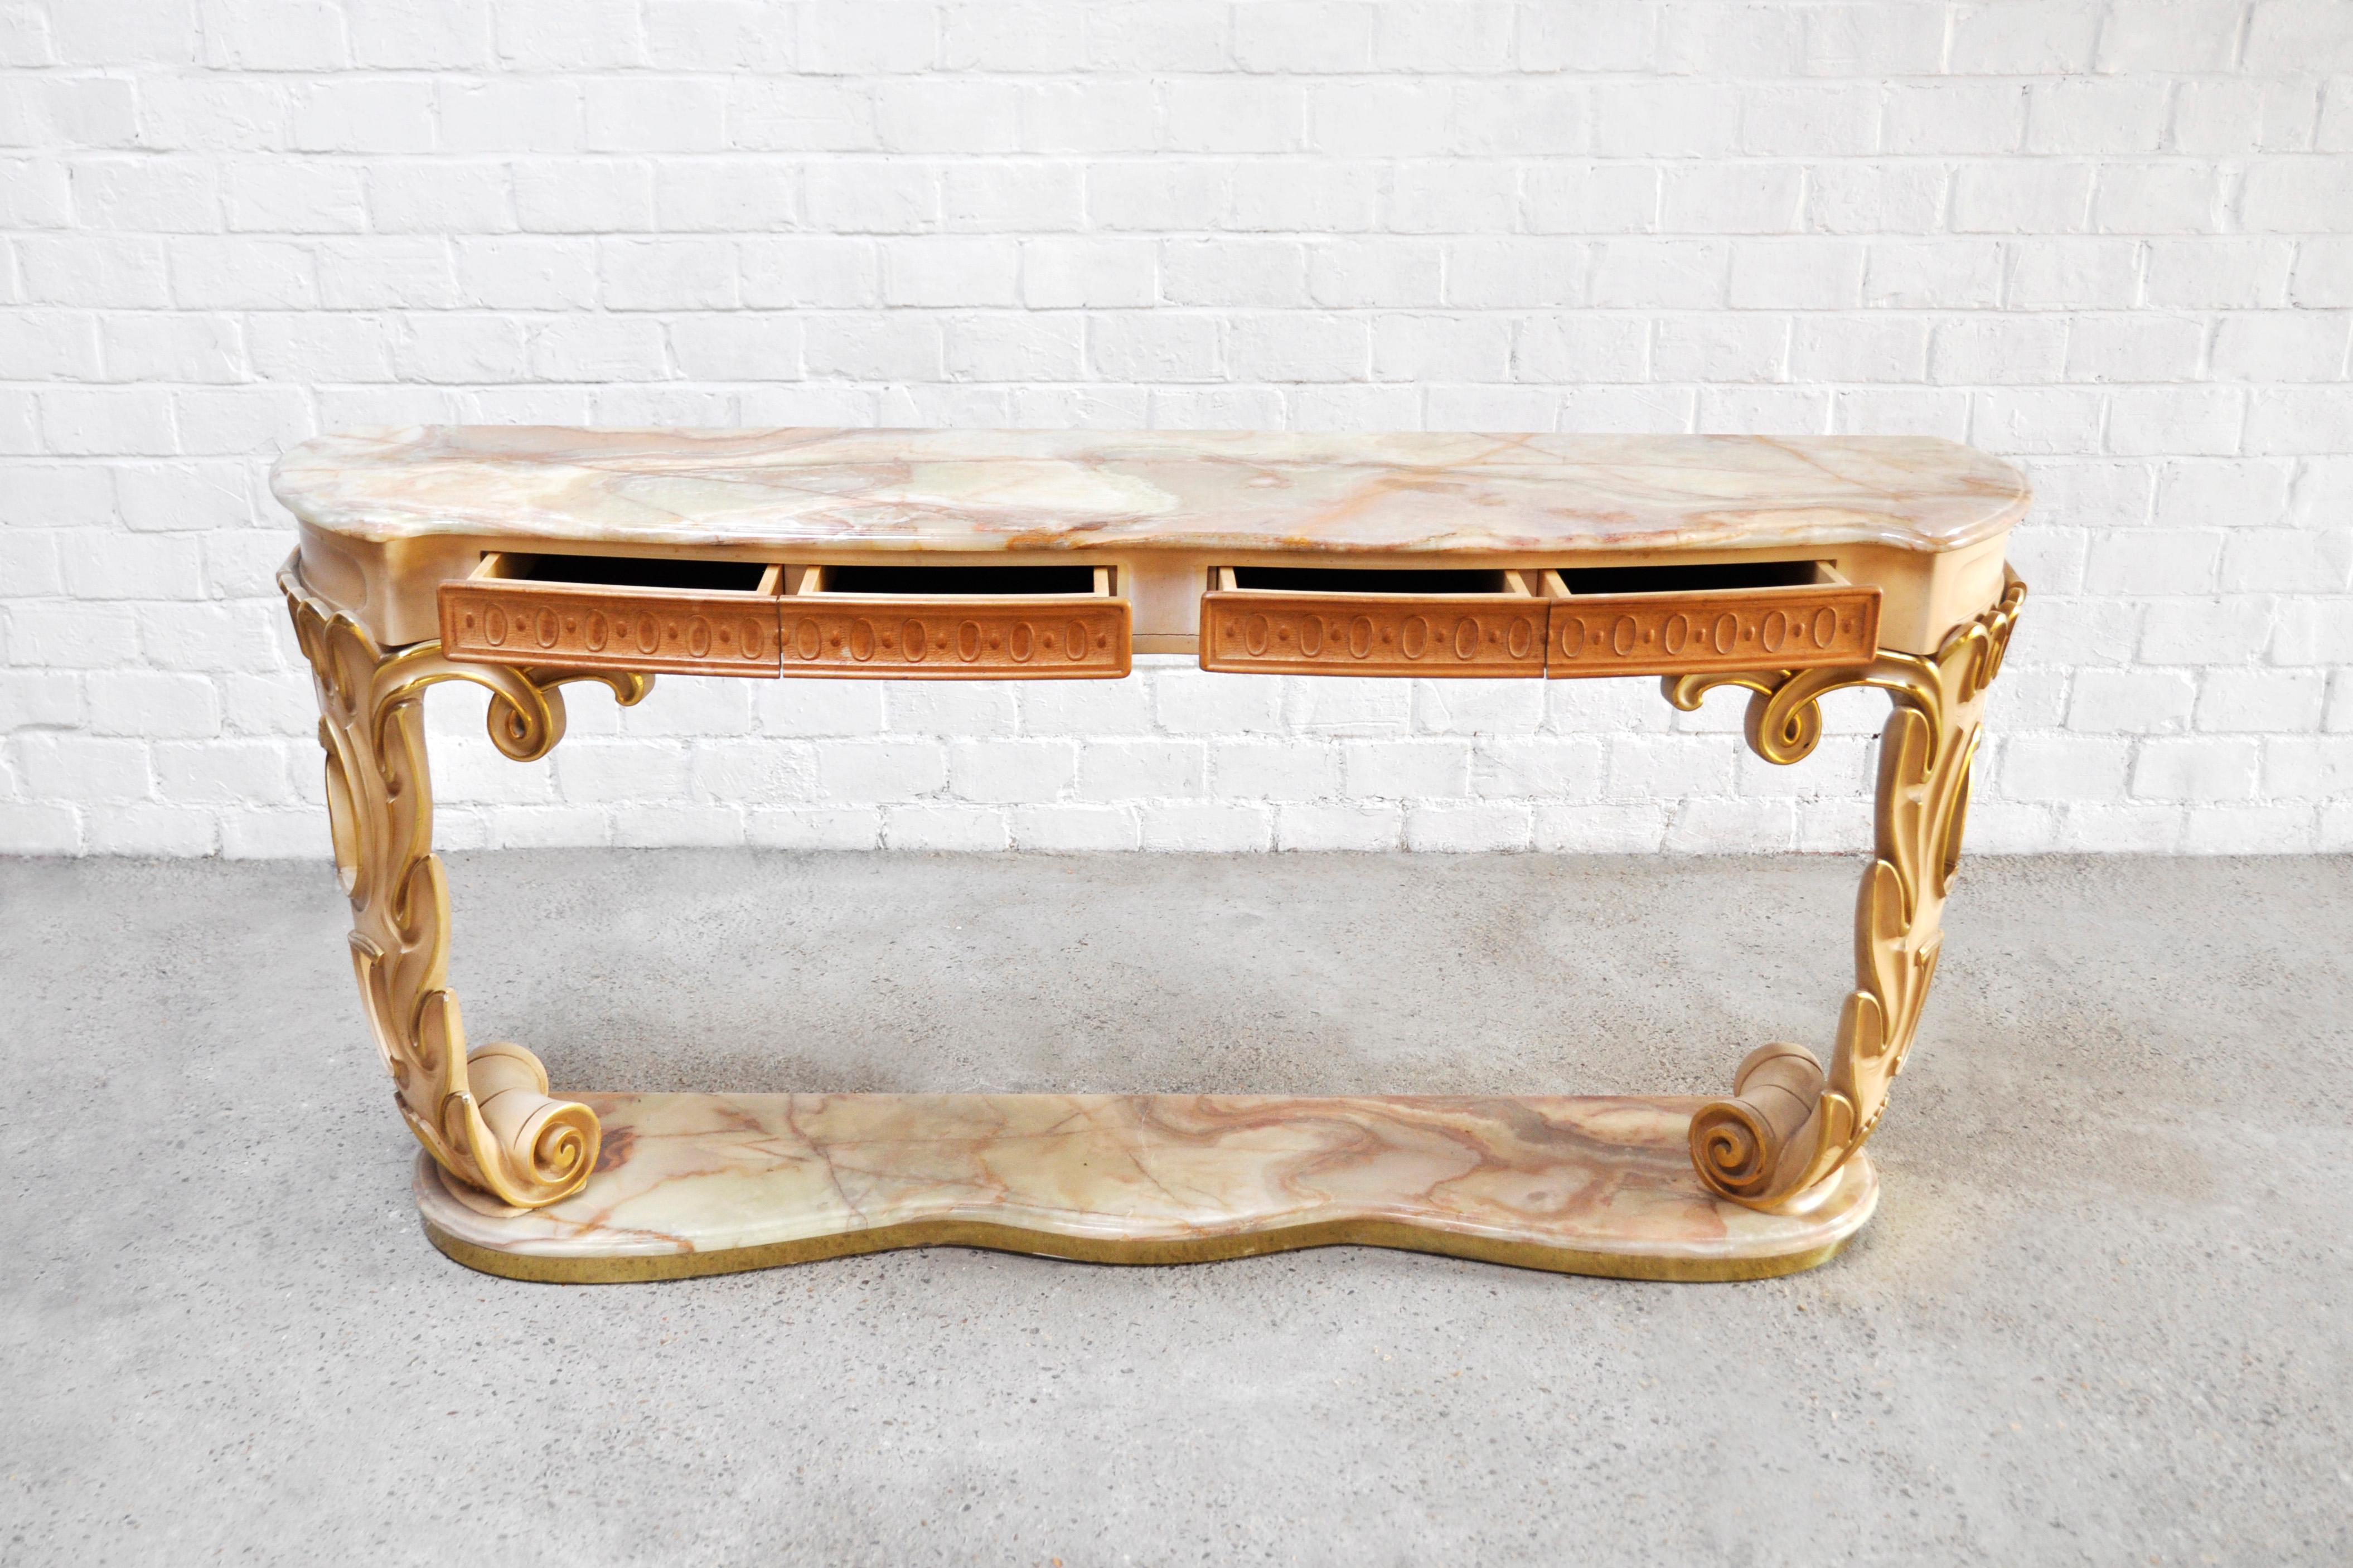 Italian Carved & Gilded Wood Console with Onyx Top, 1940s For Sale 3